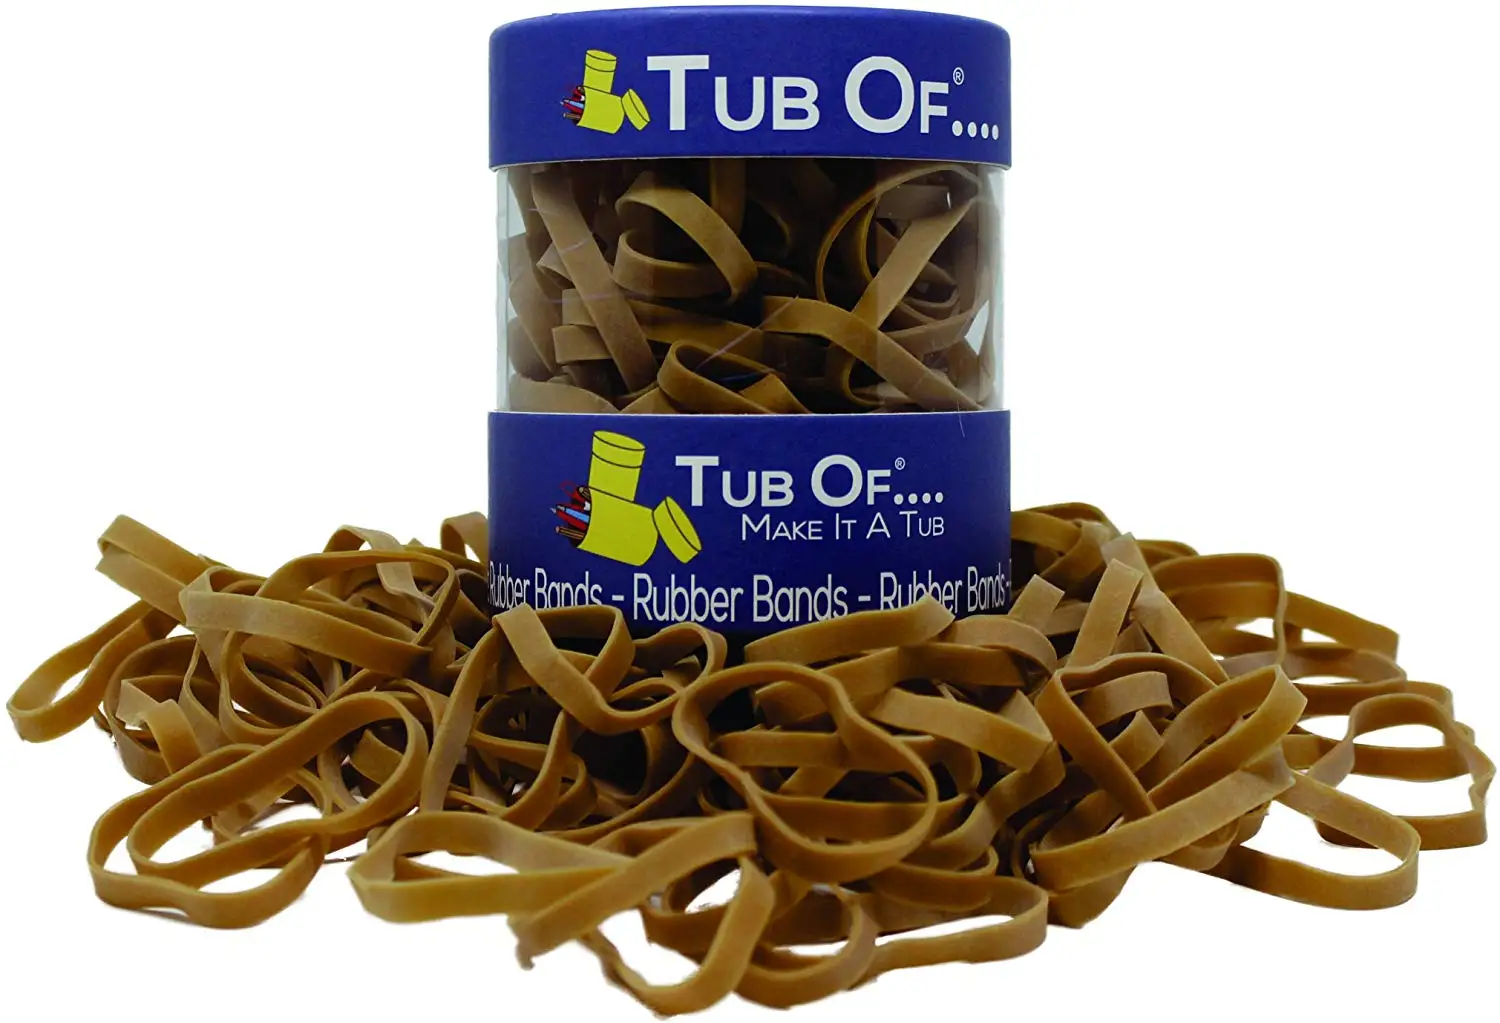 size 8 rubber bands